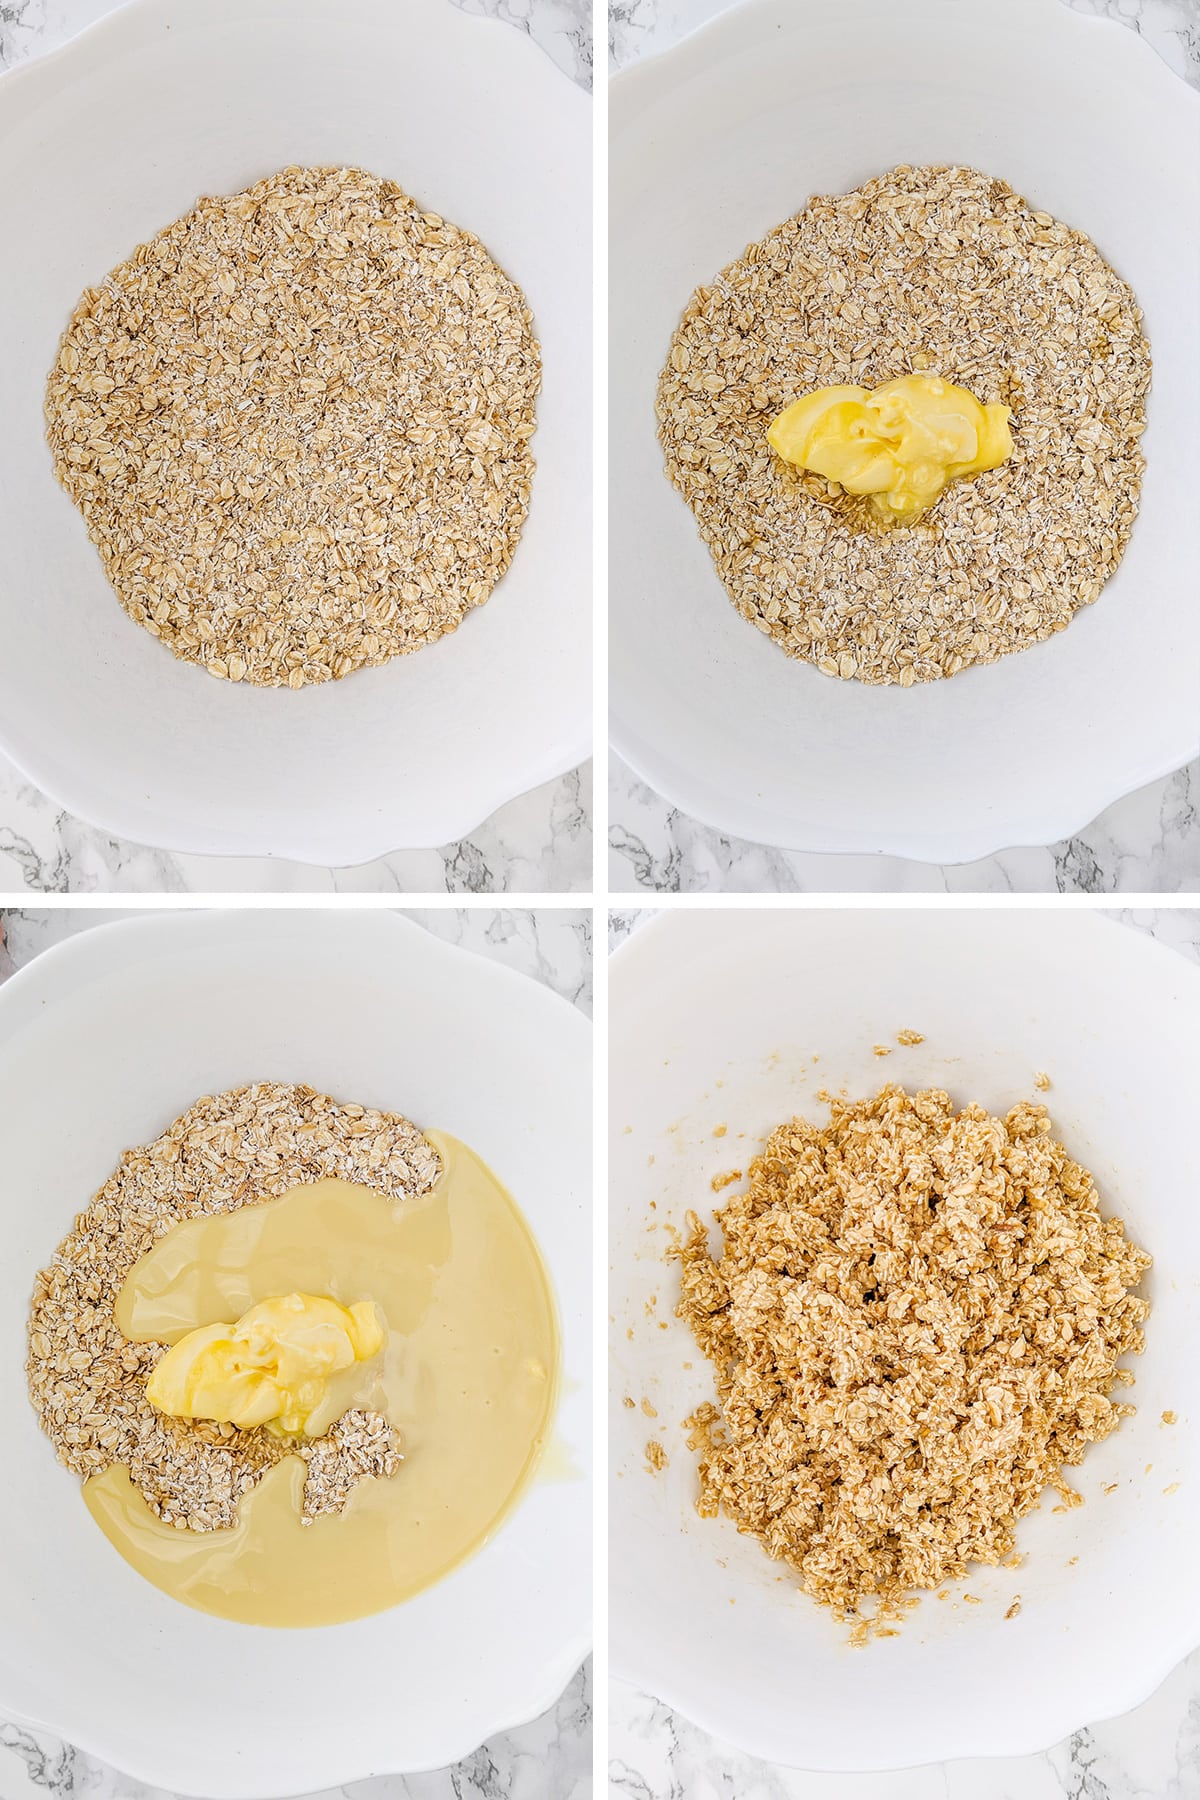 Top view of a step-by-step how to make a homemade flapjack mix.